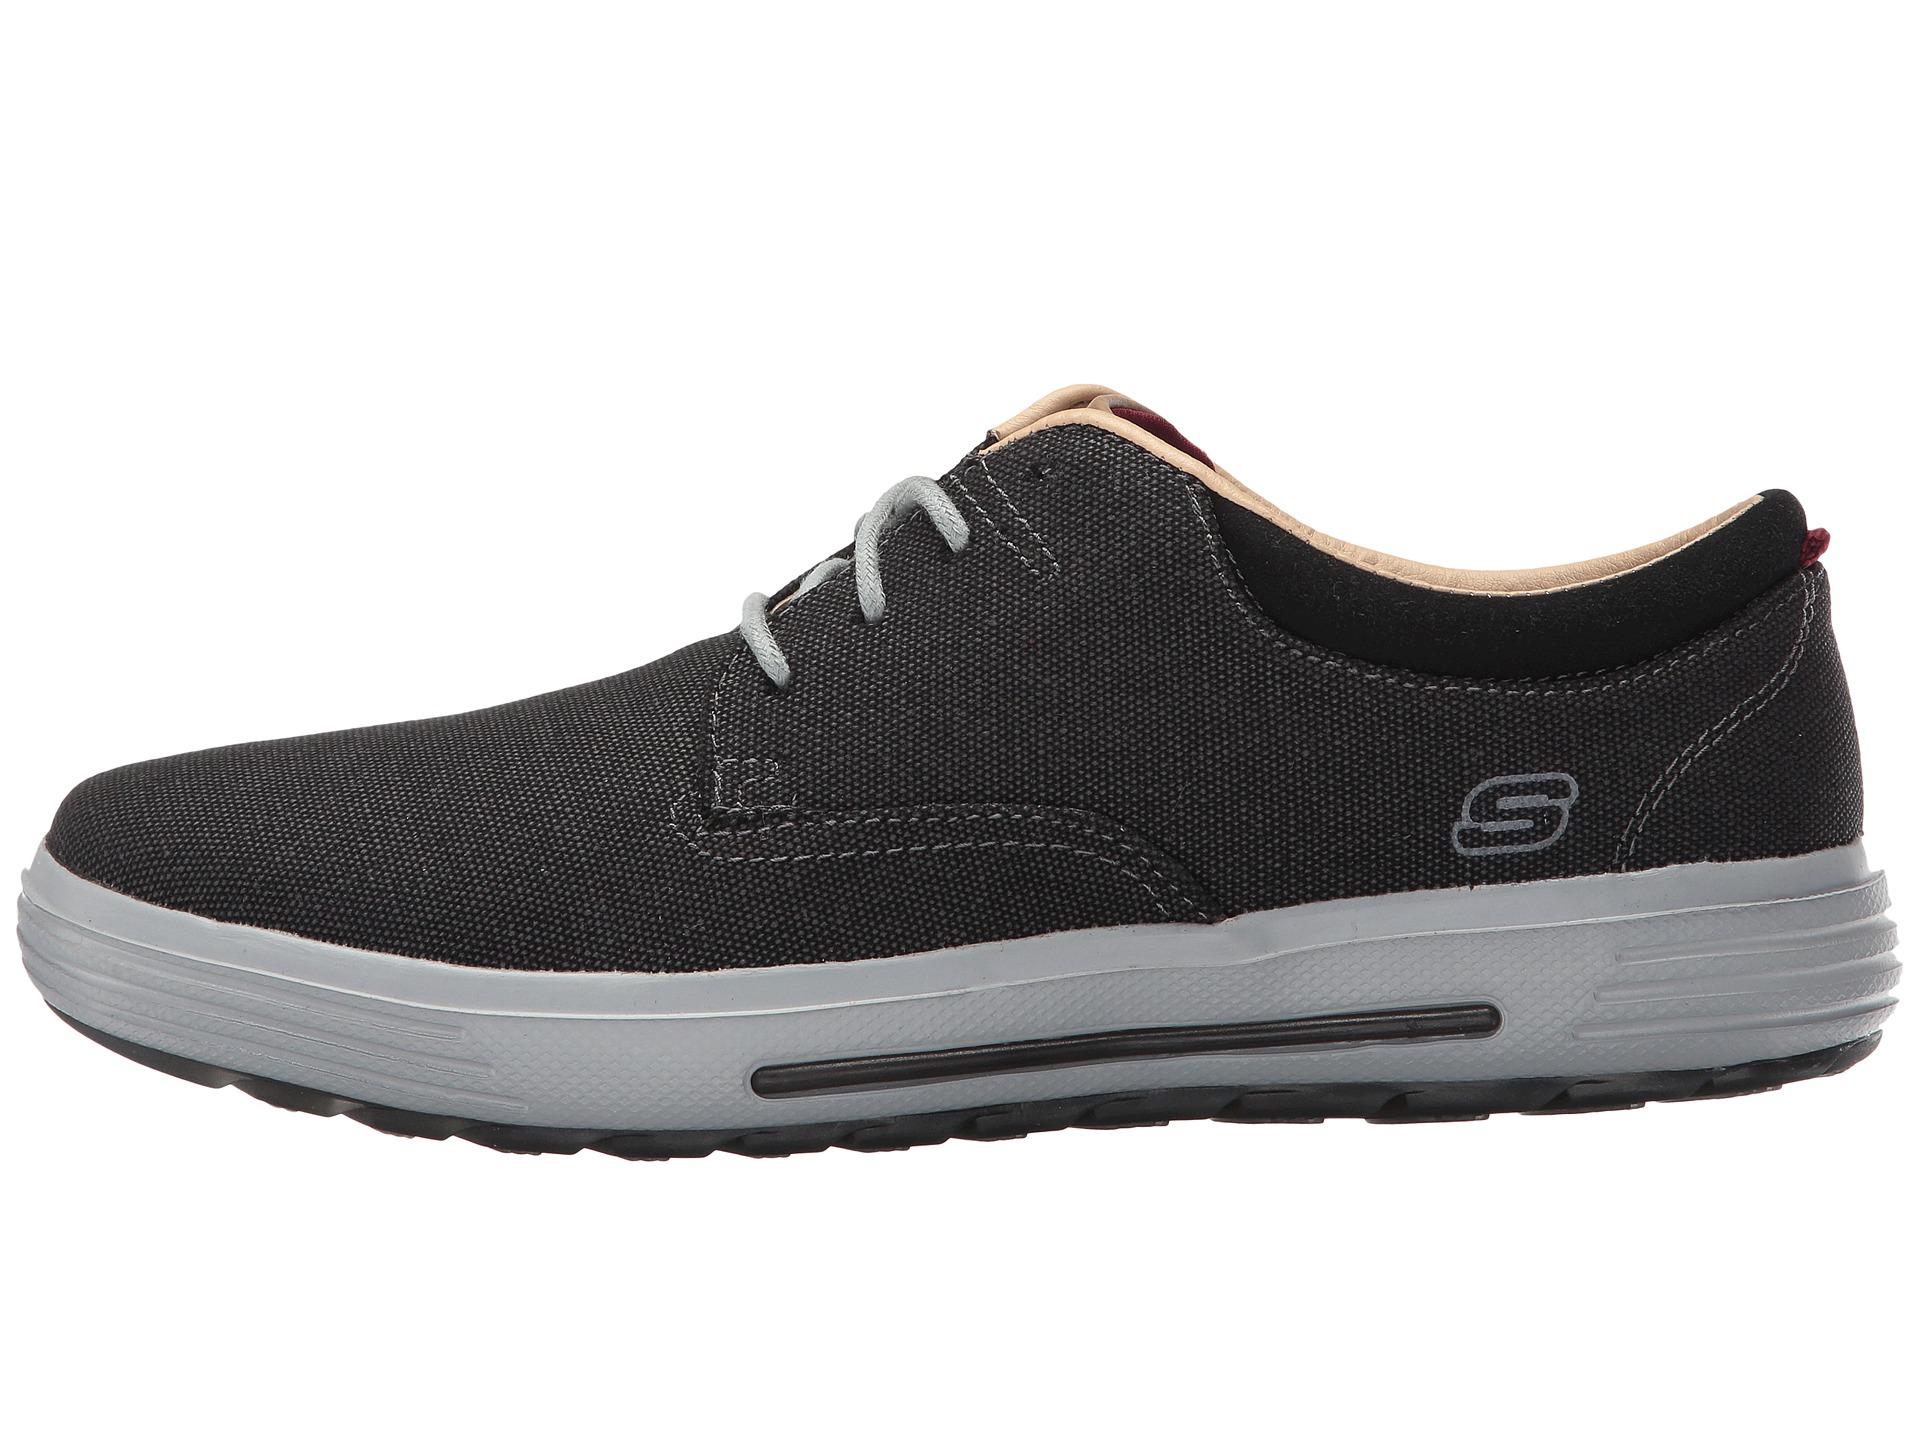 SKECHERS Classic Fit Porter - Zevelo at Zappos.com